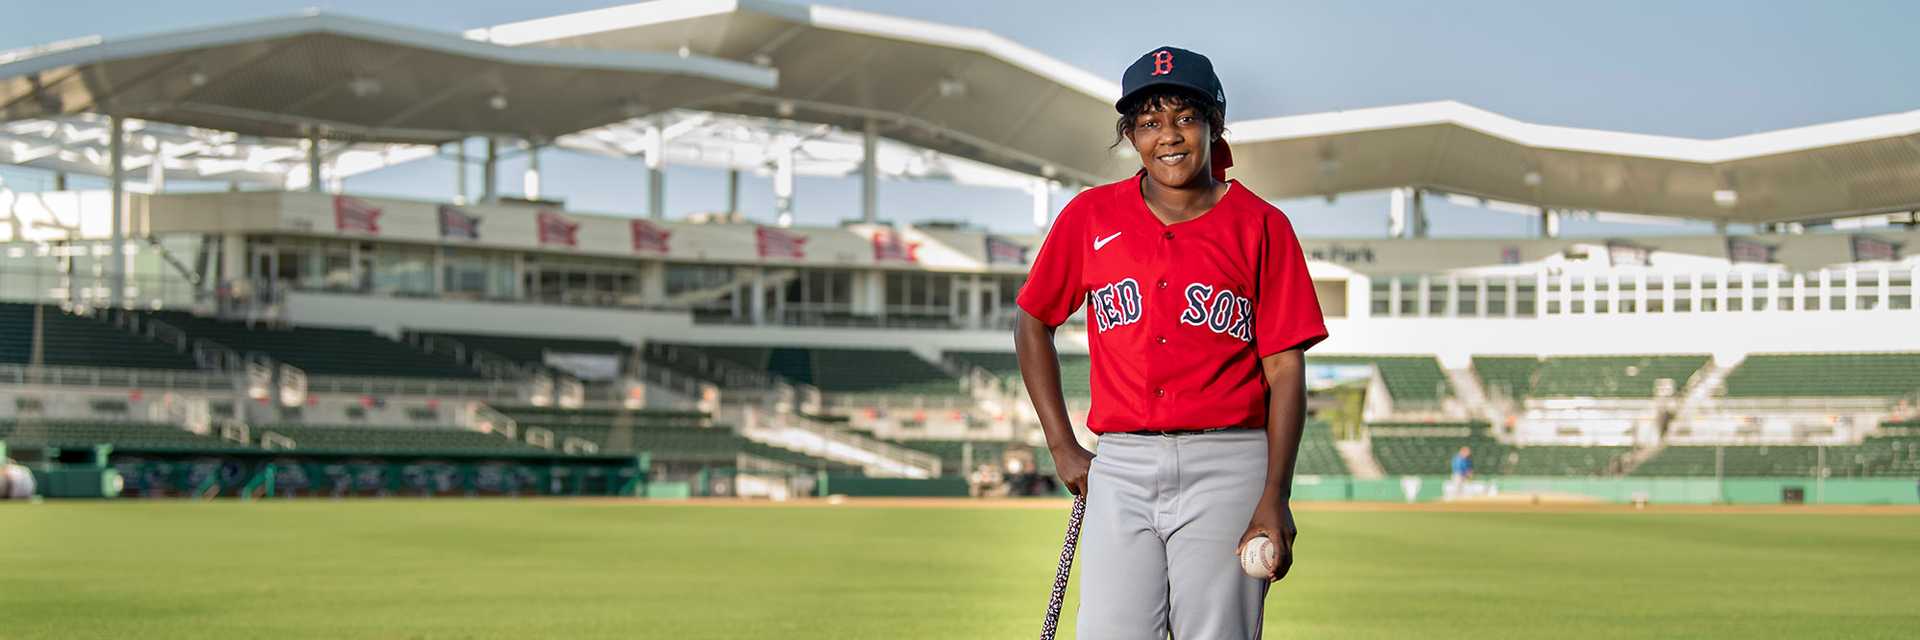 Photo of Case Western Reserve University alumna and MLB coach Bianca Smith stands in Boston Red Sox stadium holding a bat and baseball